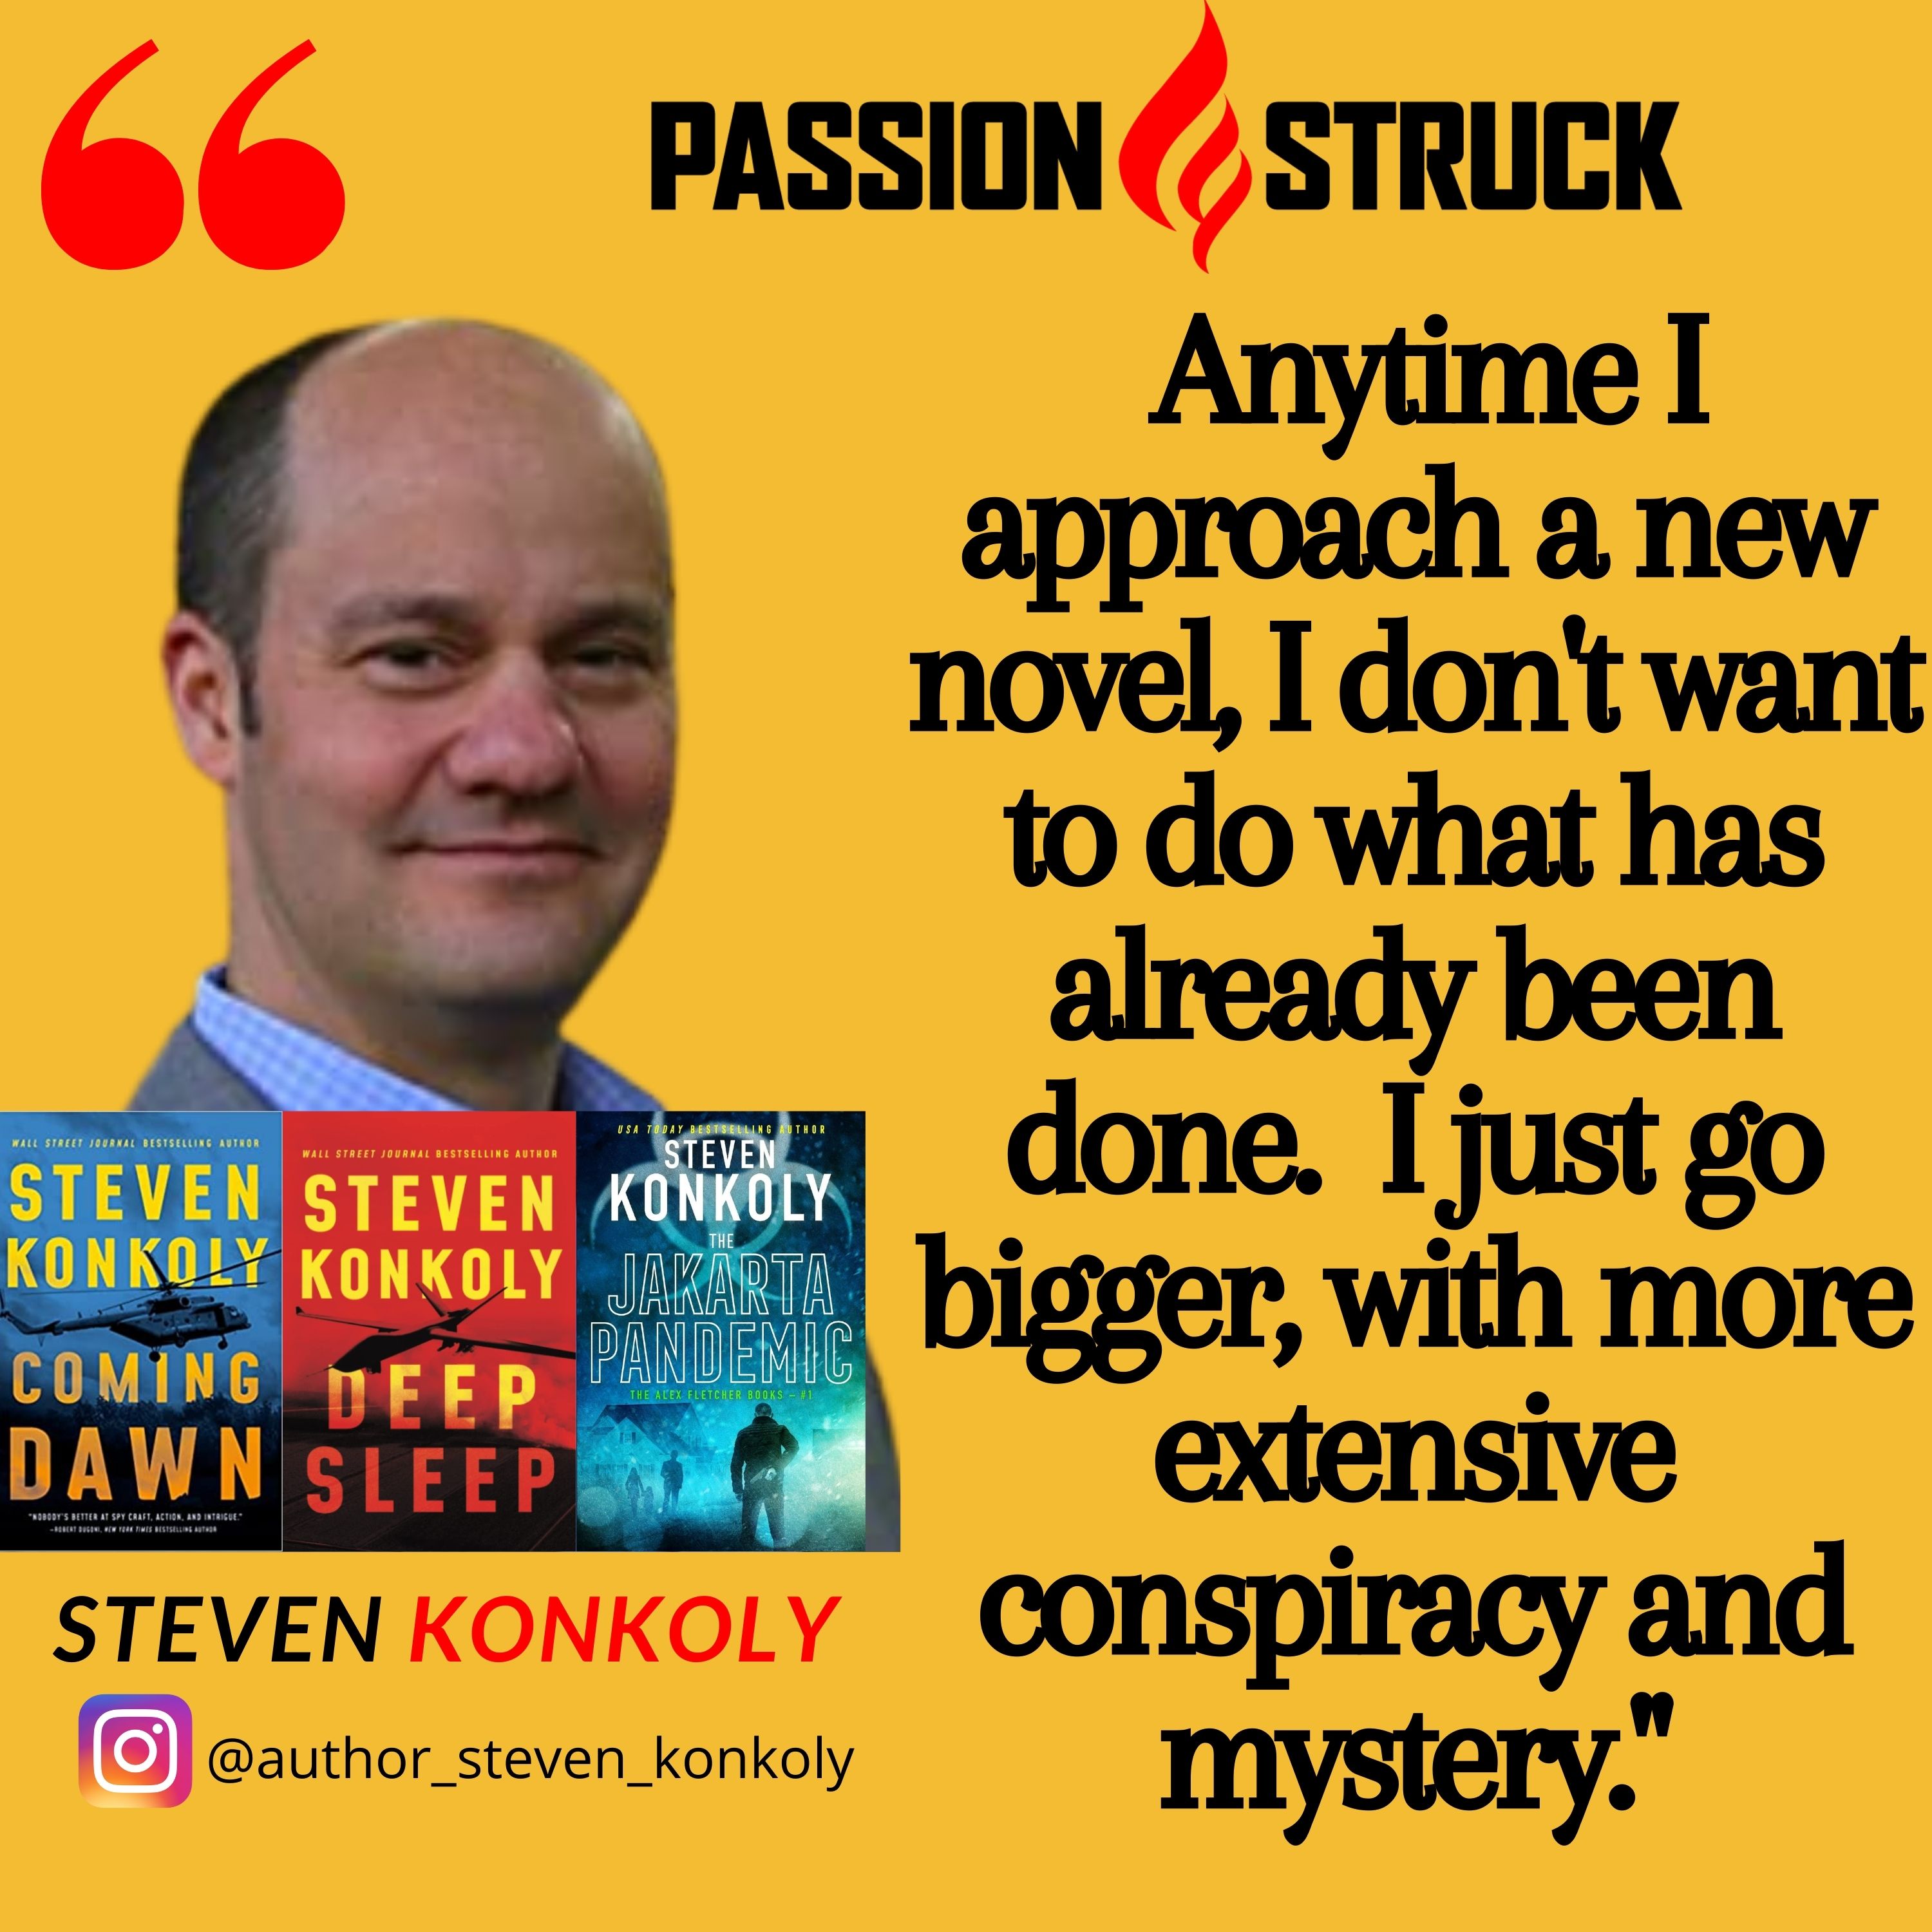 Steven Konkoly quote "Anytime I approach a new novel, I don't want to do what has already been done.  I just go bigger, with more extensive conspiracy and mystery." for passion struck